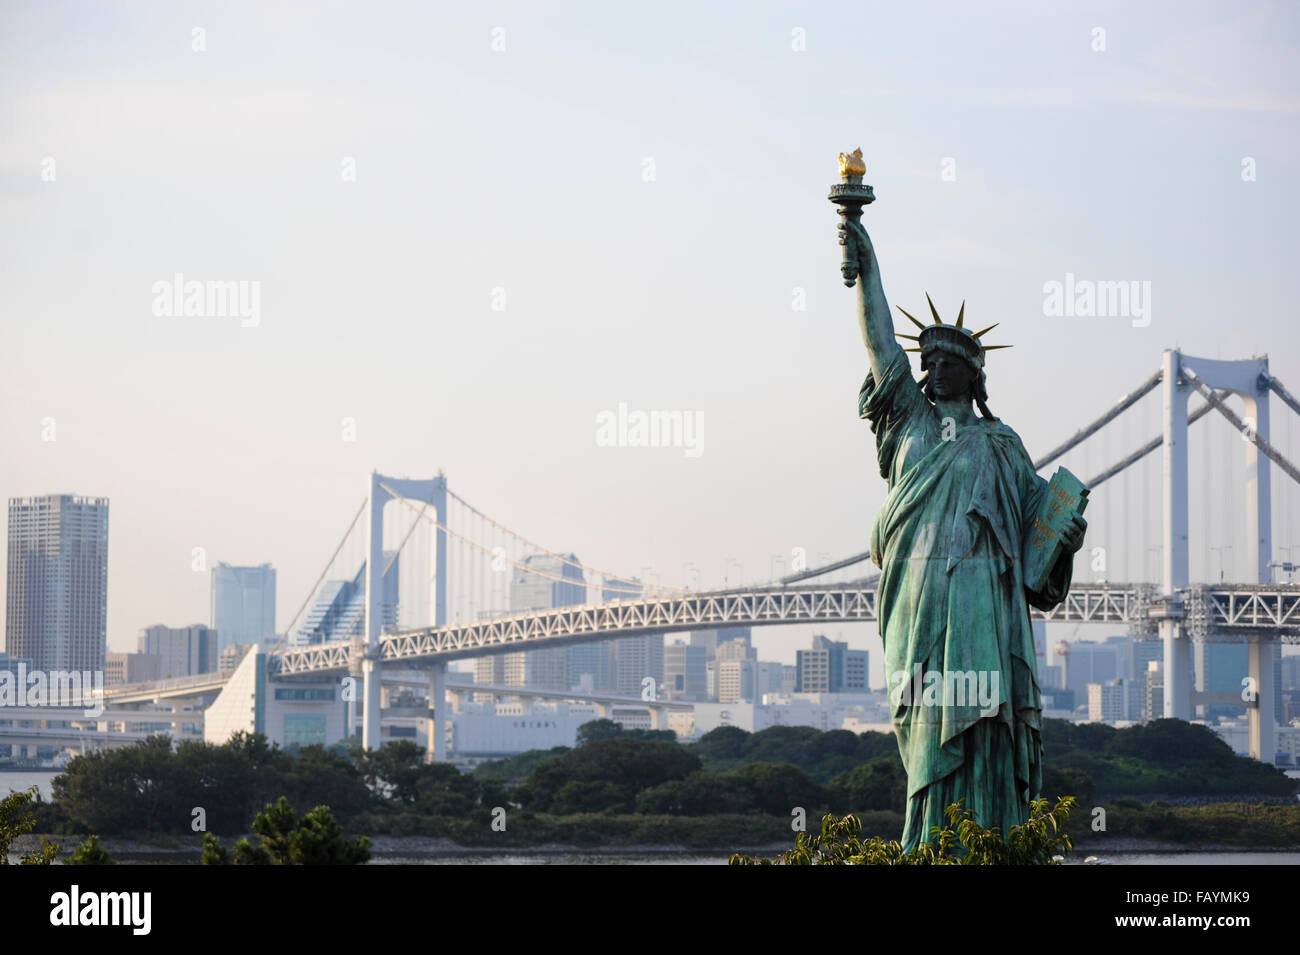 miniature copy of the Statue of Liberty in Odaiba beach in the Tokyo bay Japan Stock Photo